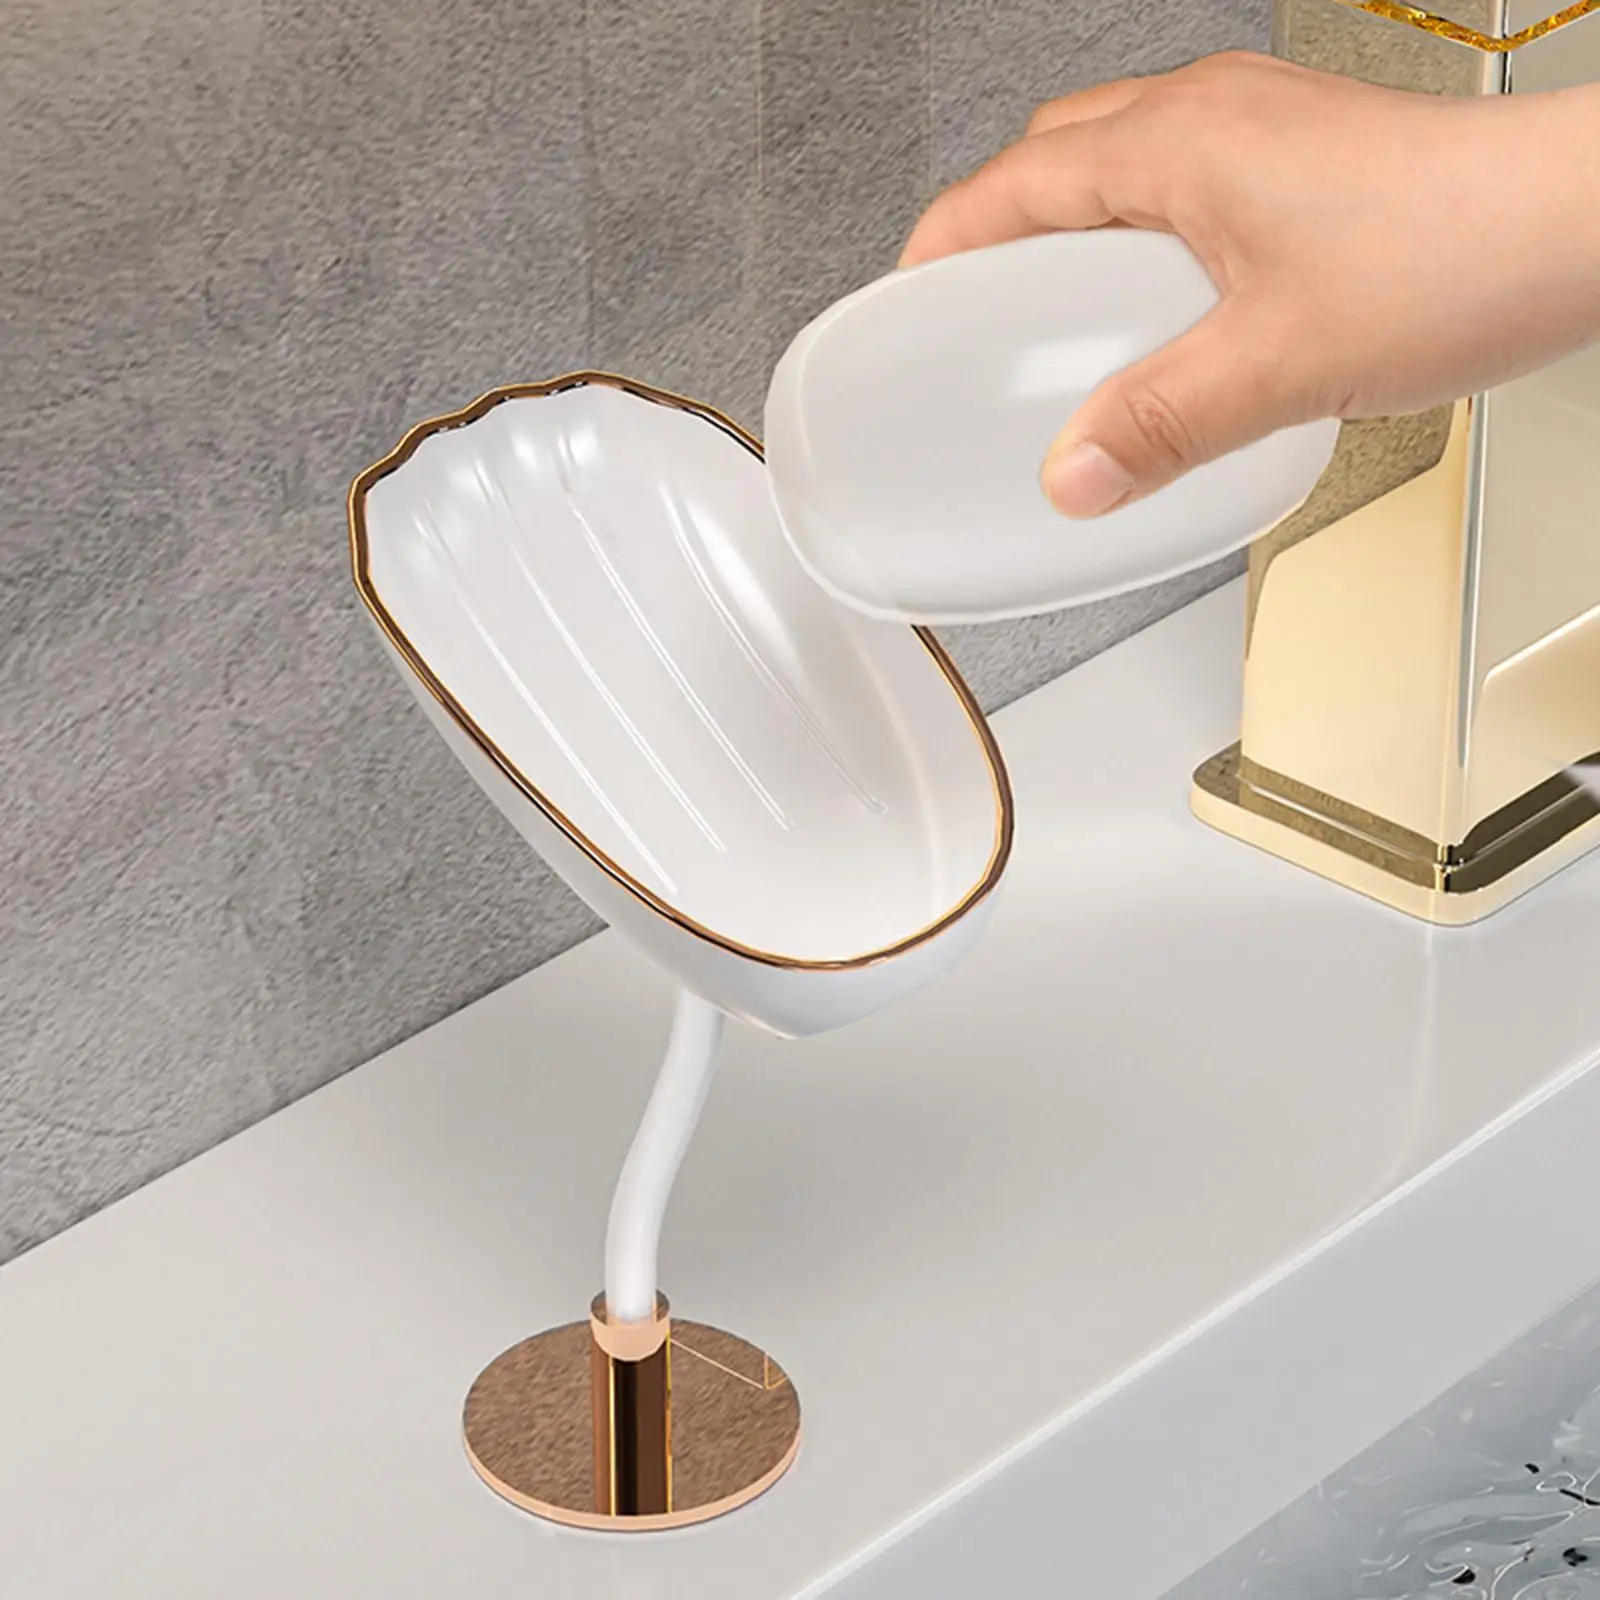 Bathroom Soap Dish Drainage Tray Free Standing or Wall Mounting for Bathroom Countertop Kitchen Decor